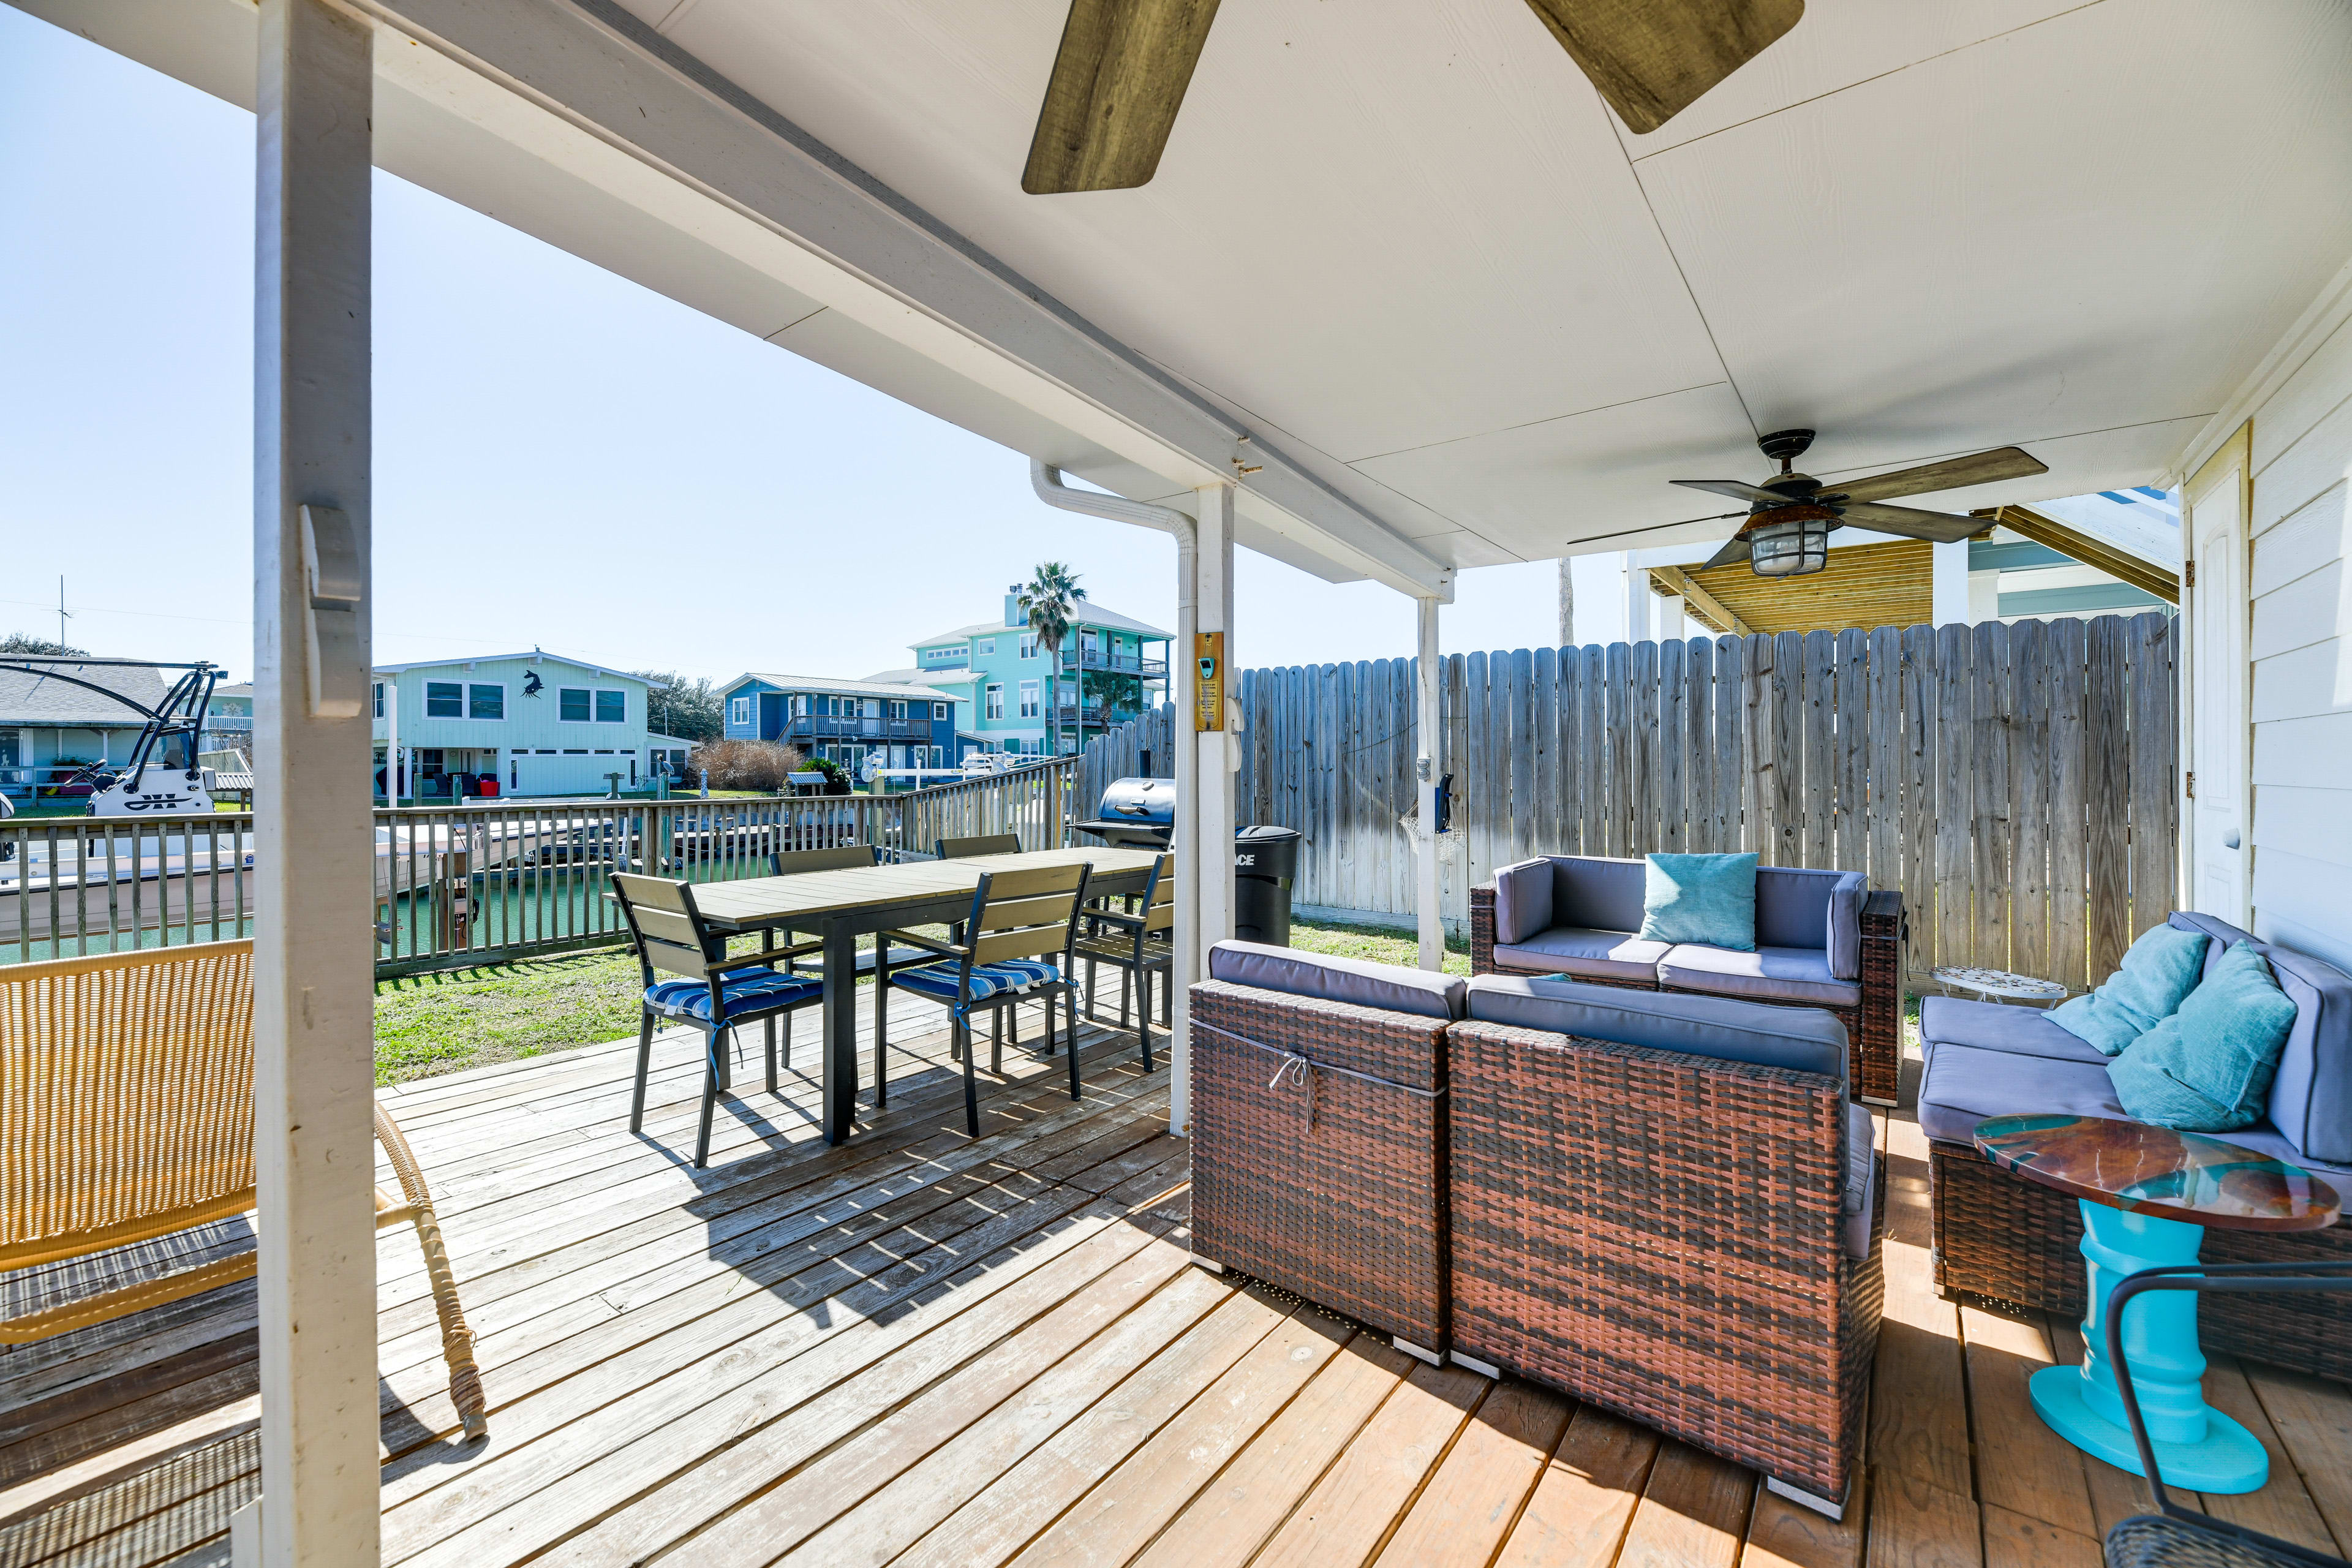 Furnished Deck | Charcoal Grill